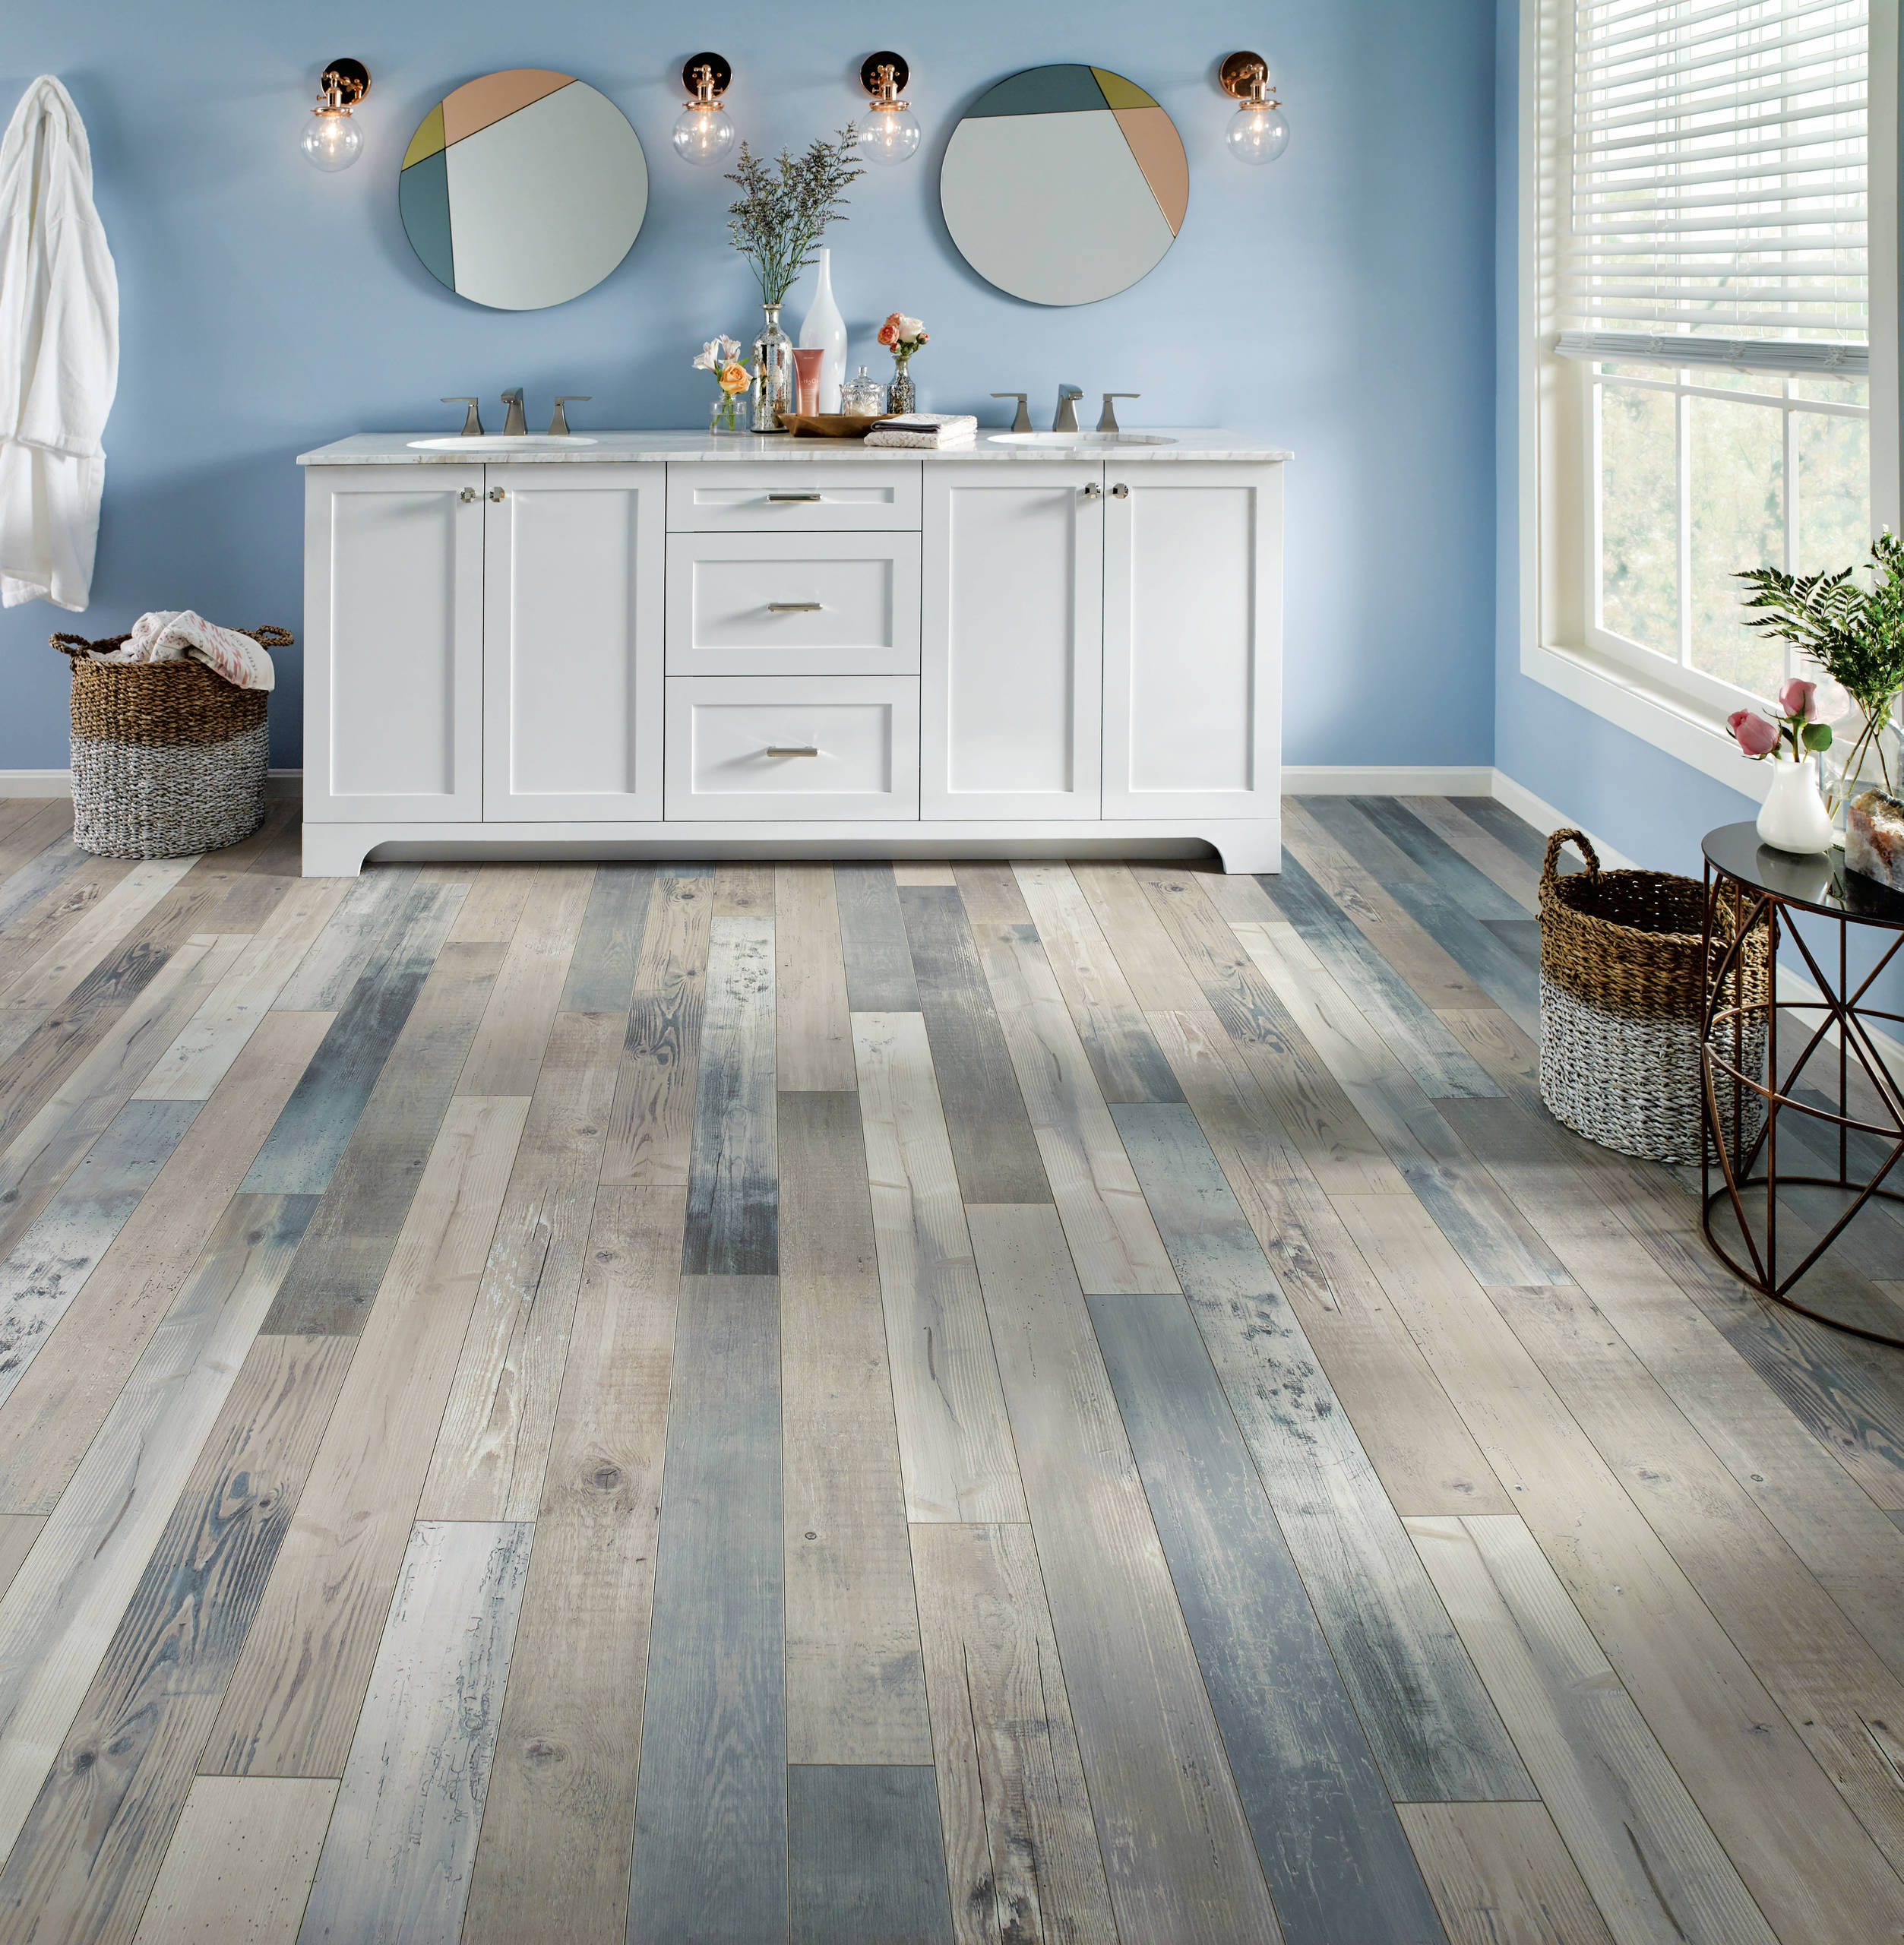 75 Vinyl Floor Bathroom with White Cabinets Ideas You'll Love - March, 2022  | Houzz